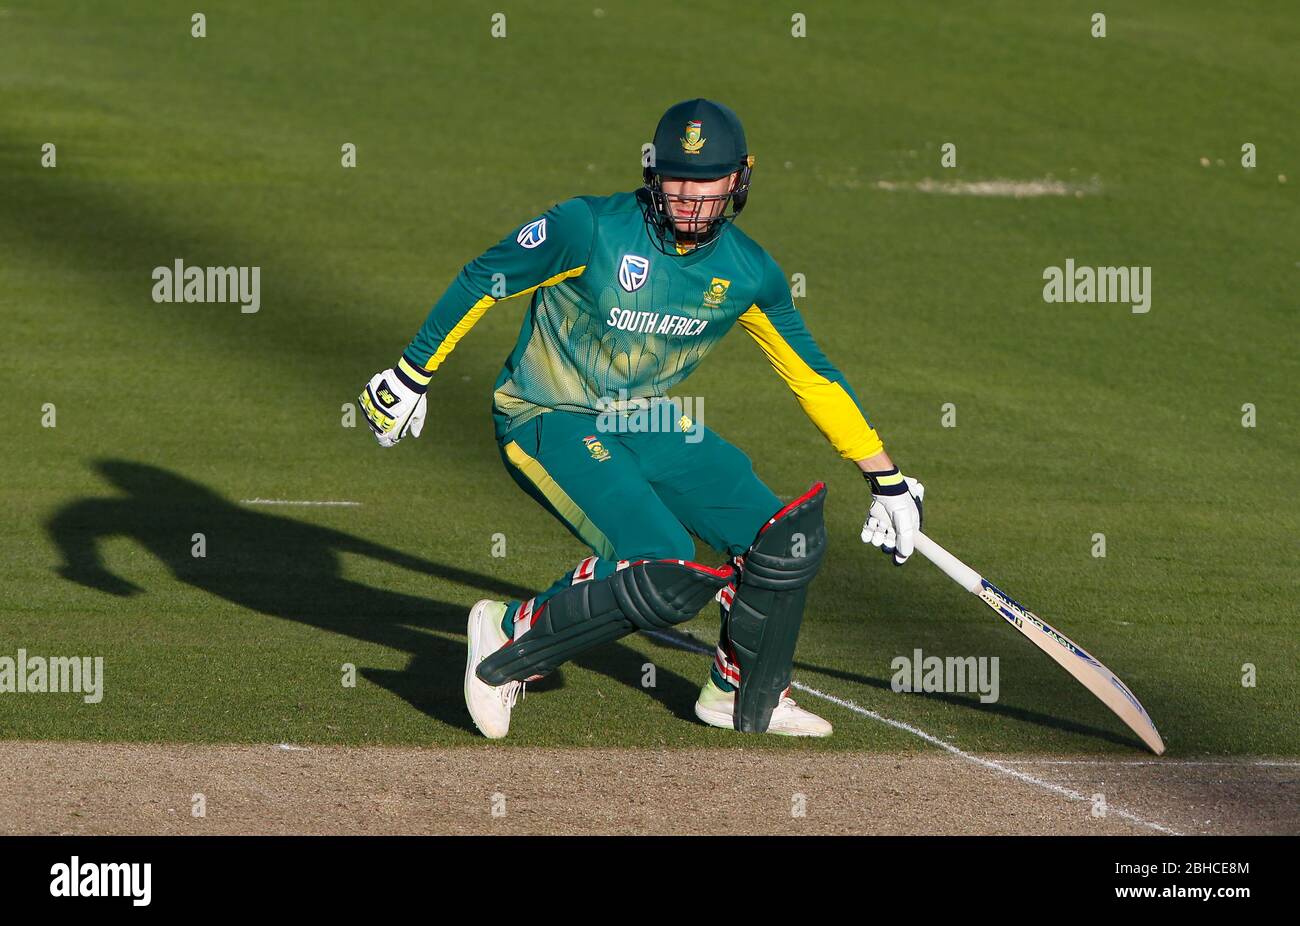 David Miller of South Africa batting during the Tour Match between Sussex and South Africa at The 1st Central County Ground in Hove. 19 May 2017 Stock Photo